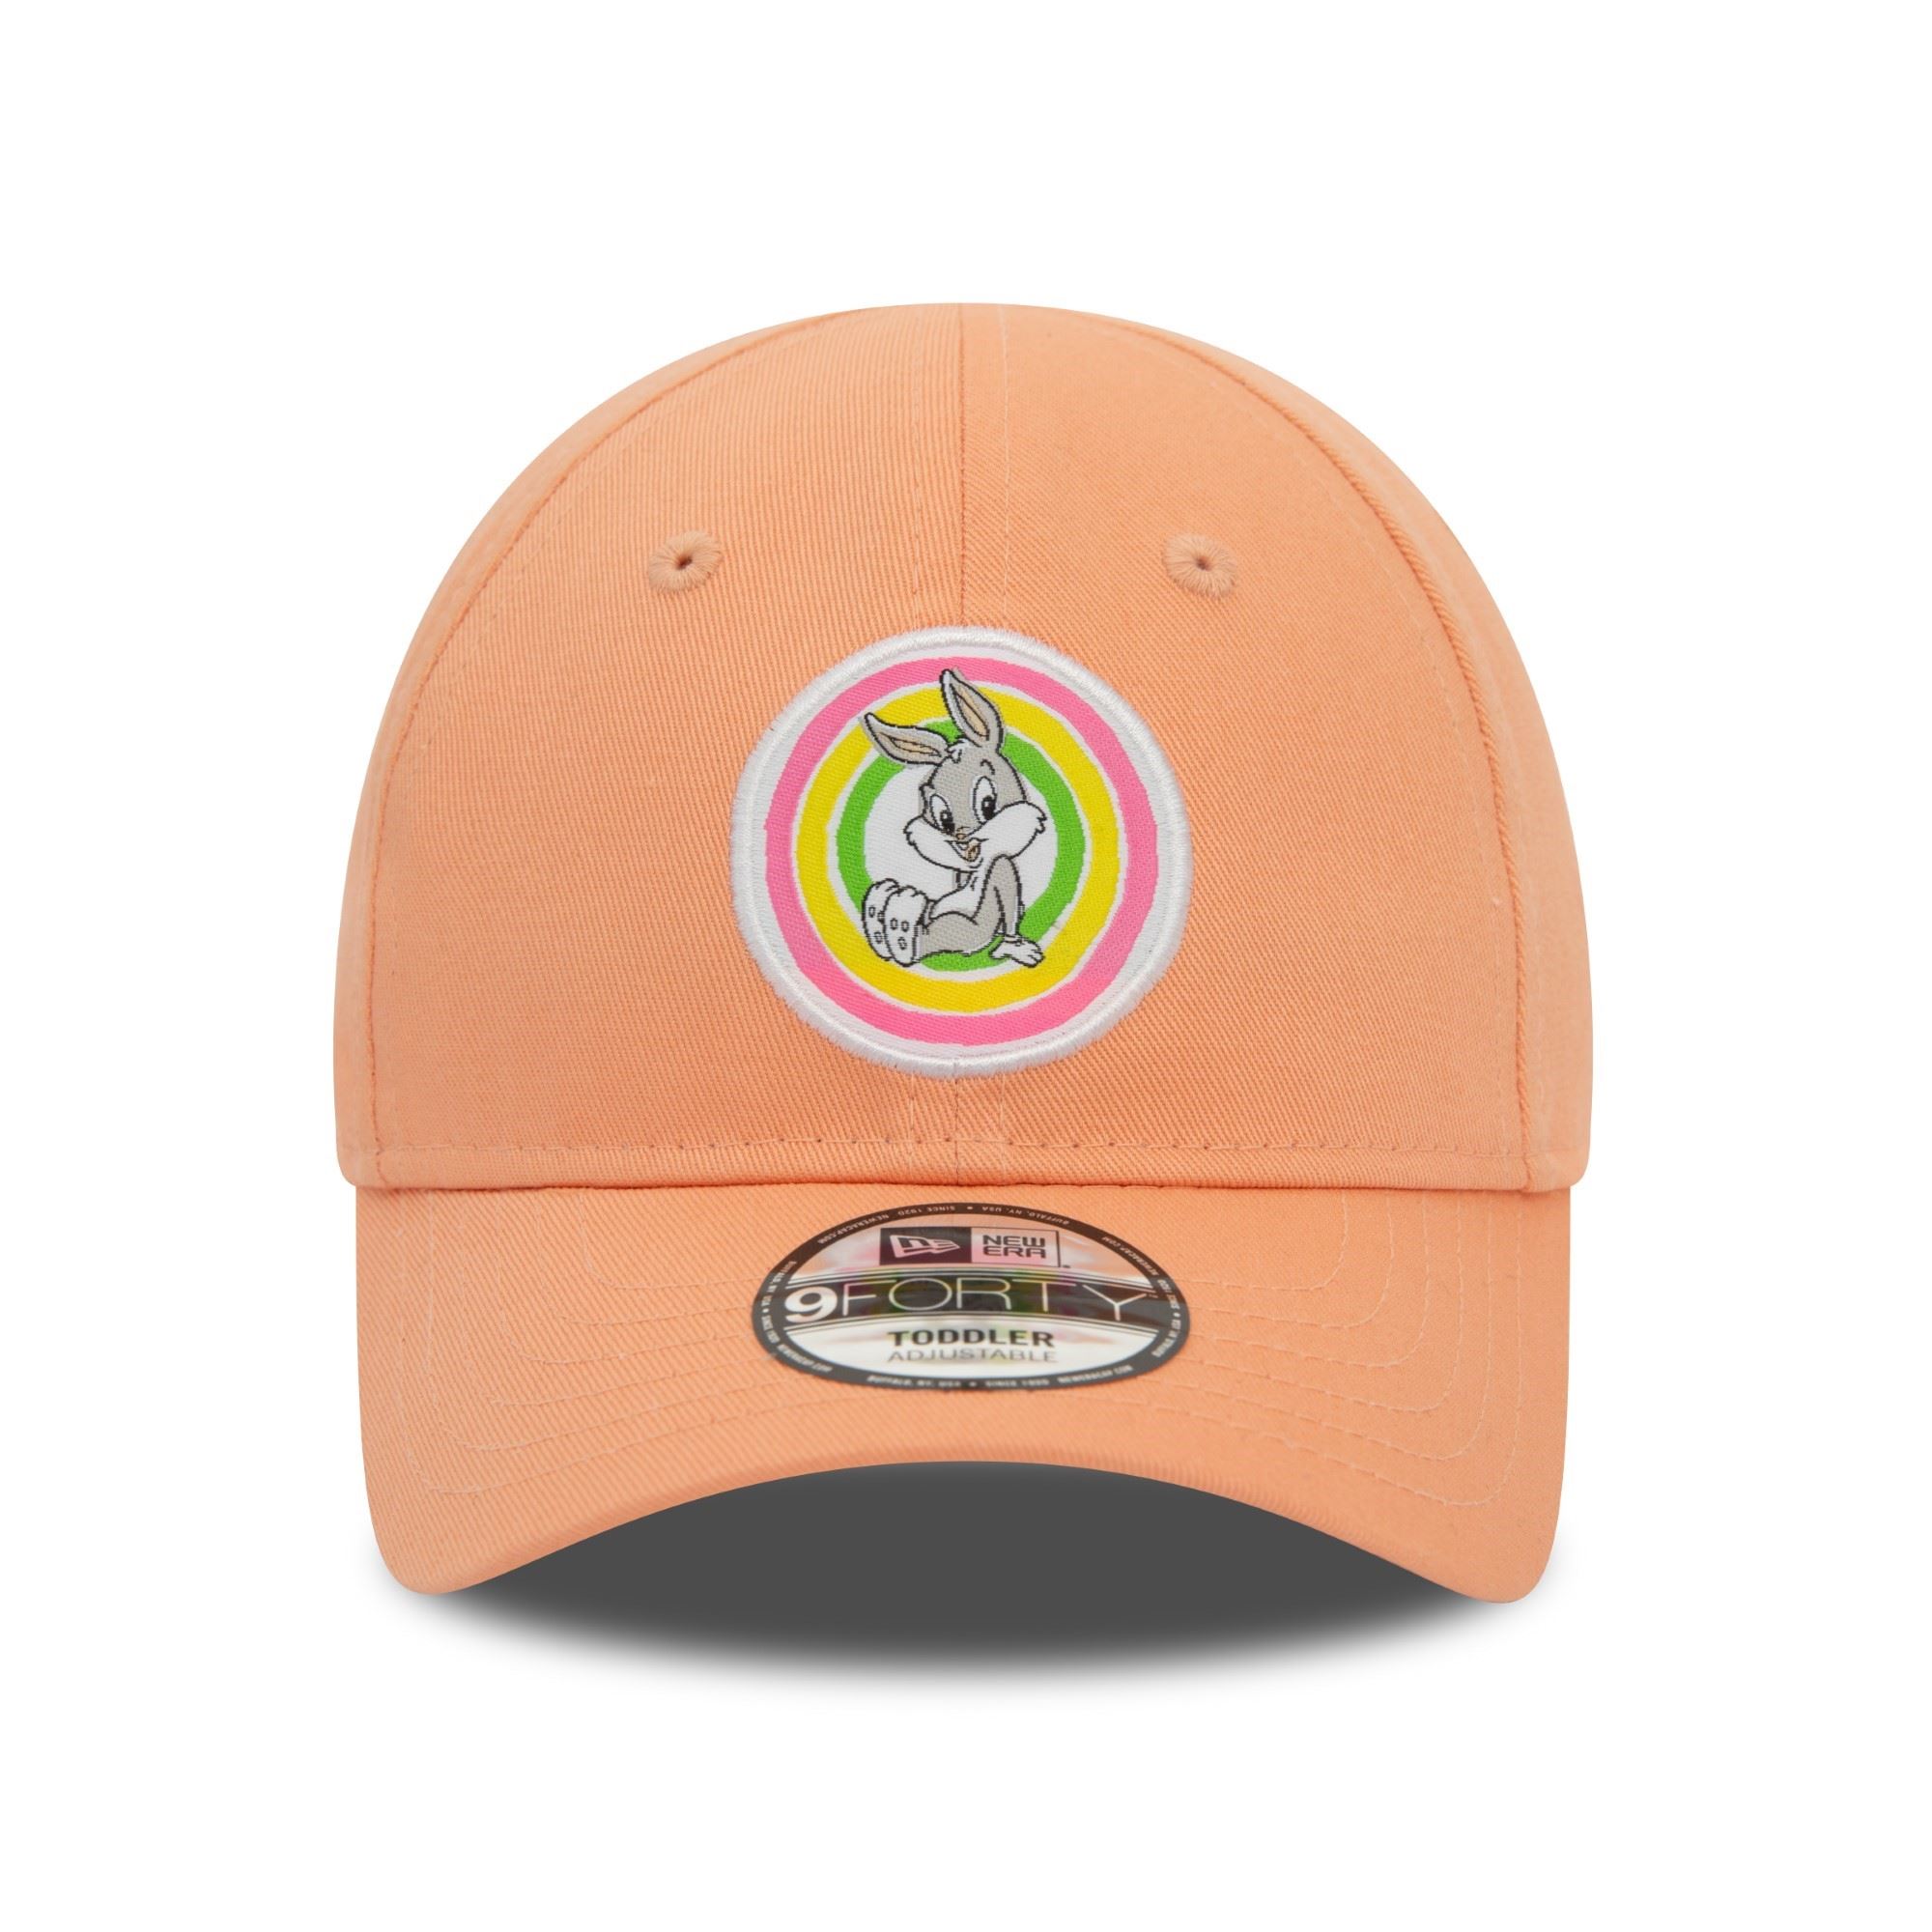 Bugs Bunny Looney Tunes Pastel Apricot 9Forty Toddler Cap New Era